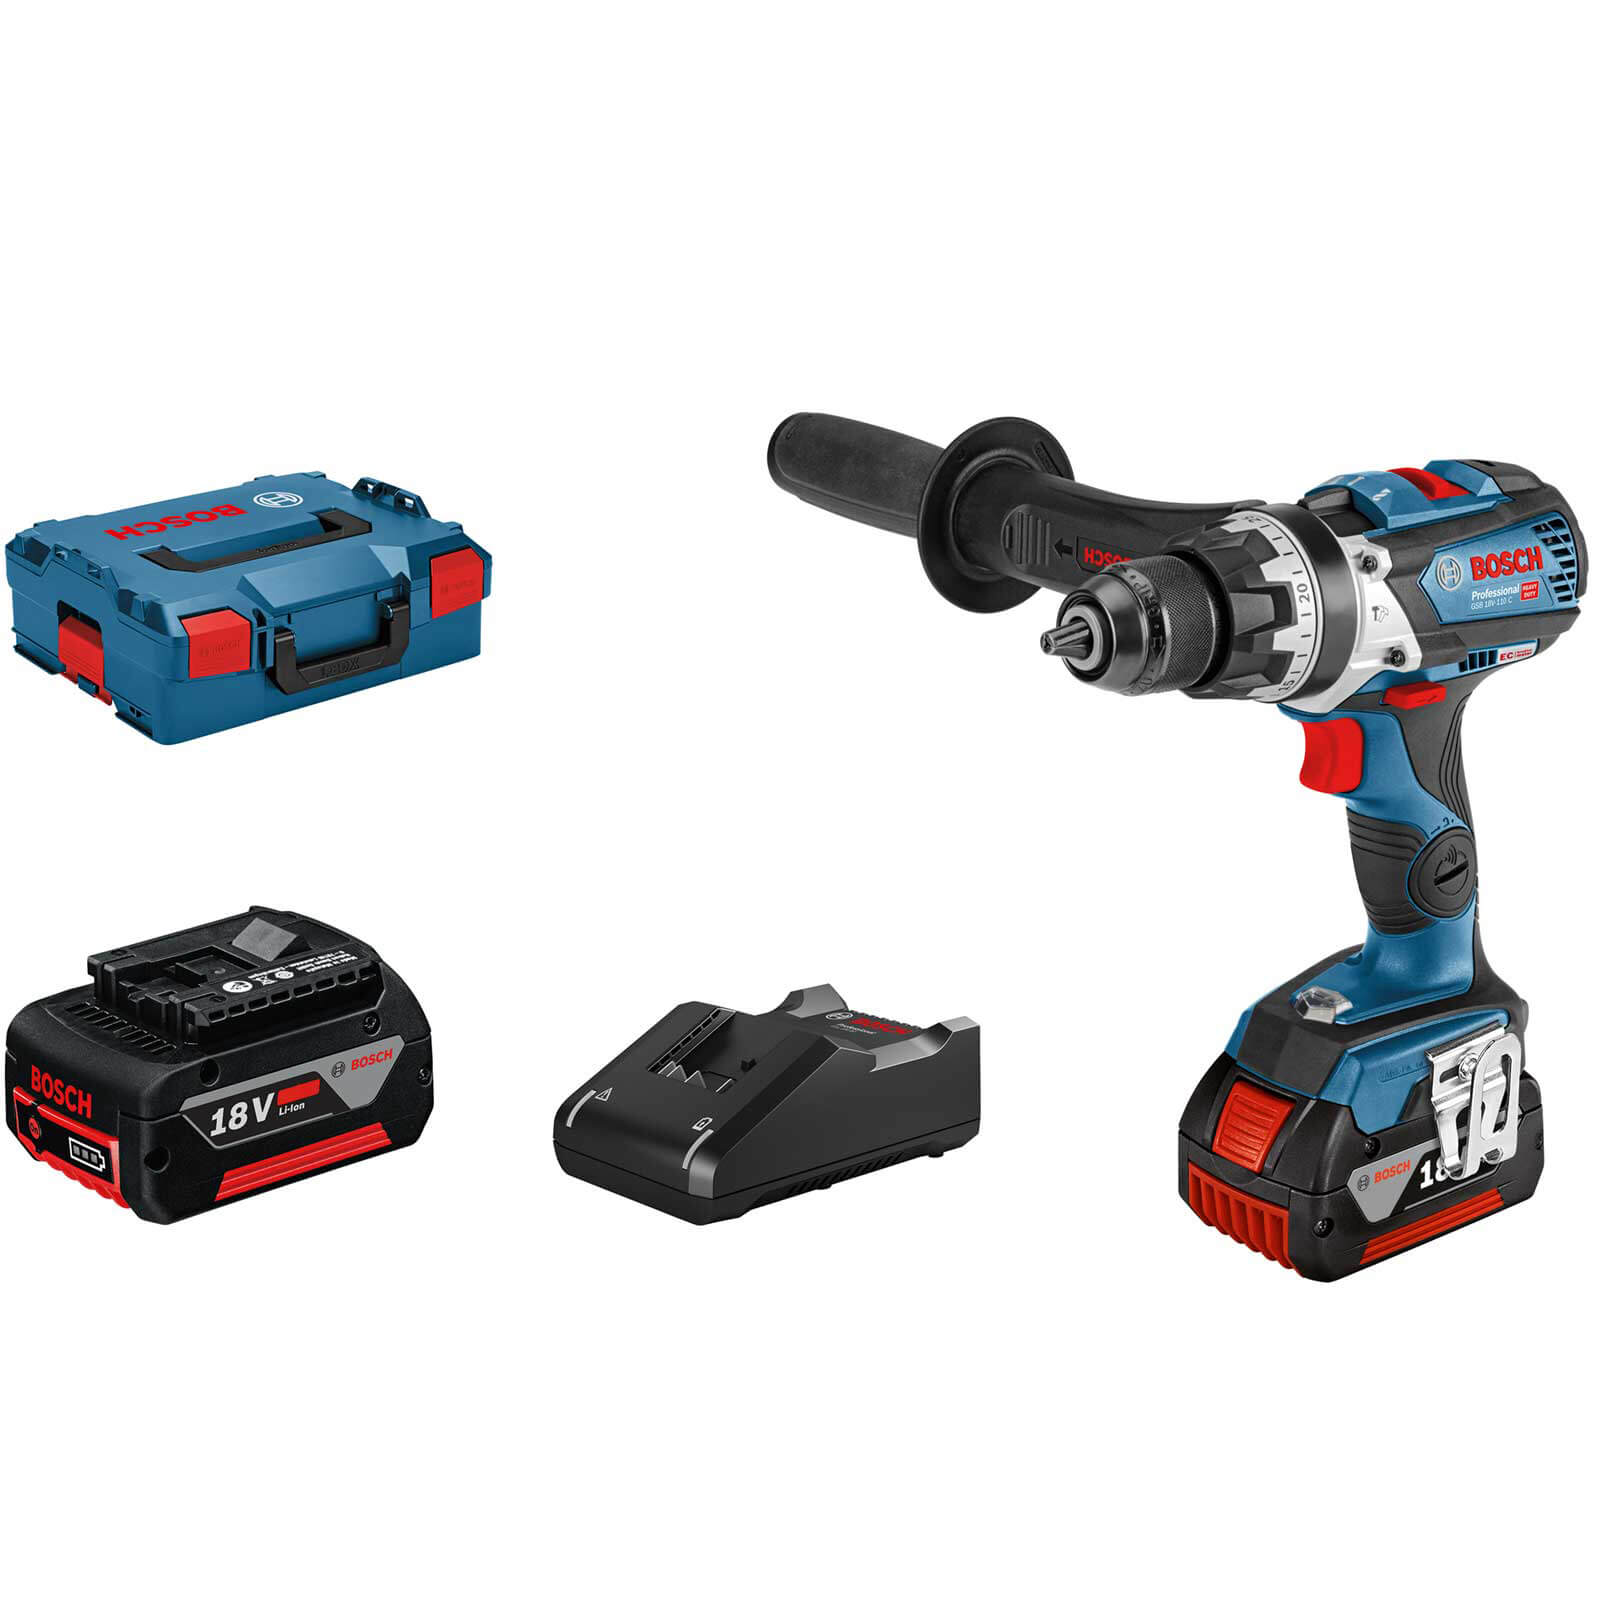 Image of Bosch GSB 18V-110 18v Cordless Brushless Combi Drill Connect Ready 2 x 4ah Li-ion ProCore Charger Case